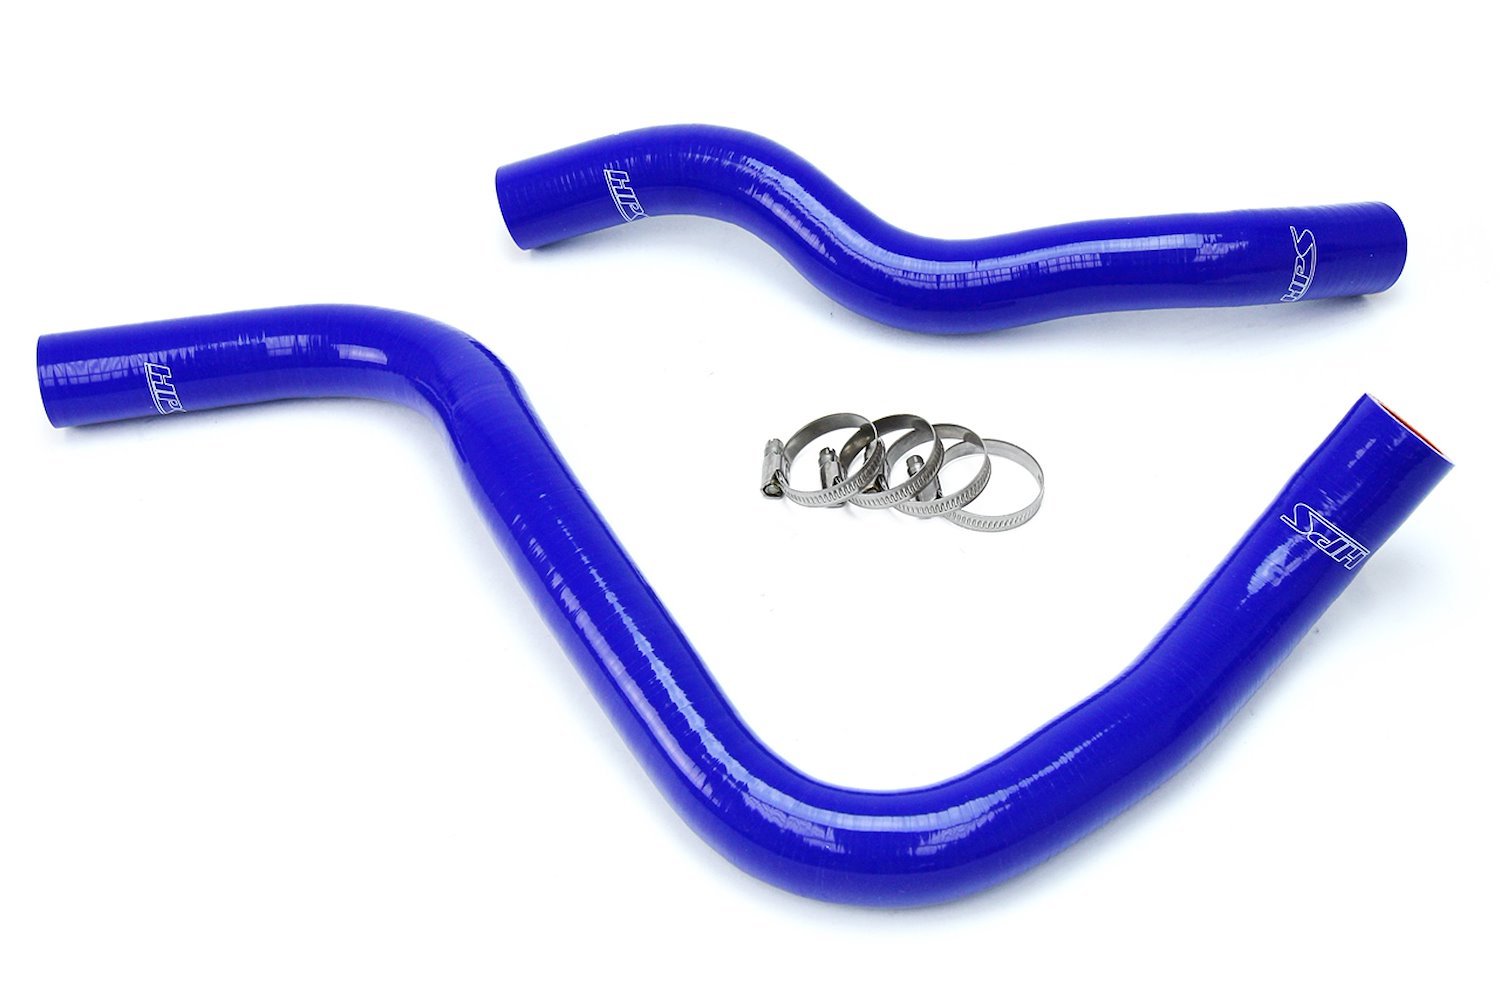 57-1662-BLUE Radiator Hose Kit, High-Temp 3-Ply Reinforced Silicone, Replace OEM Rubber Radiator Coolant Hoses